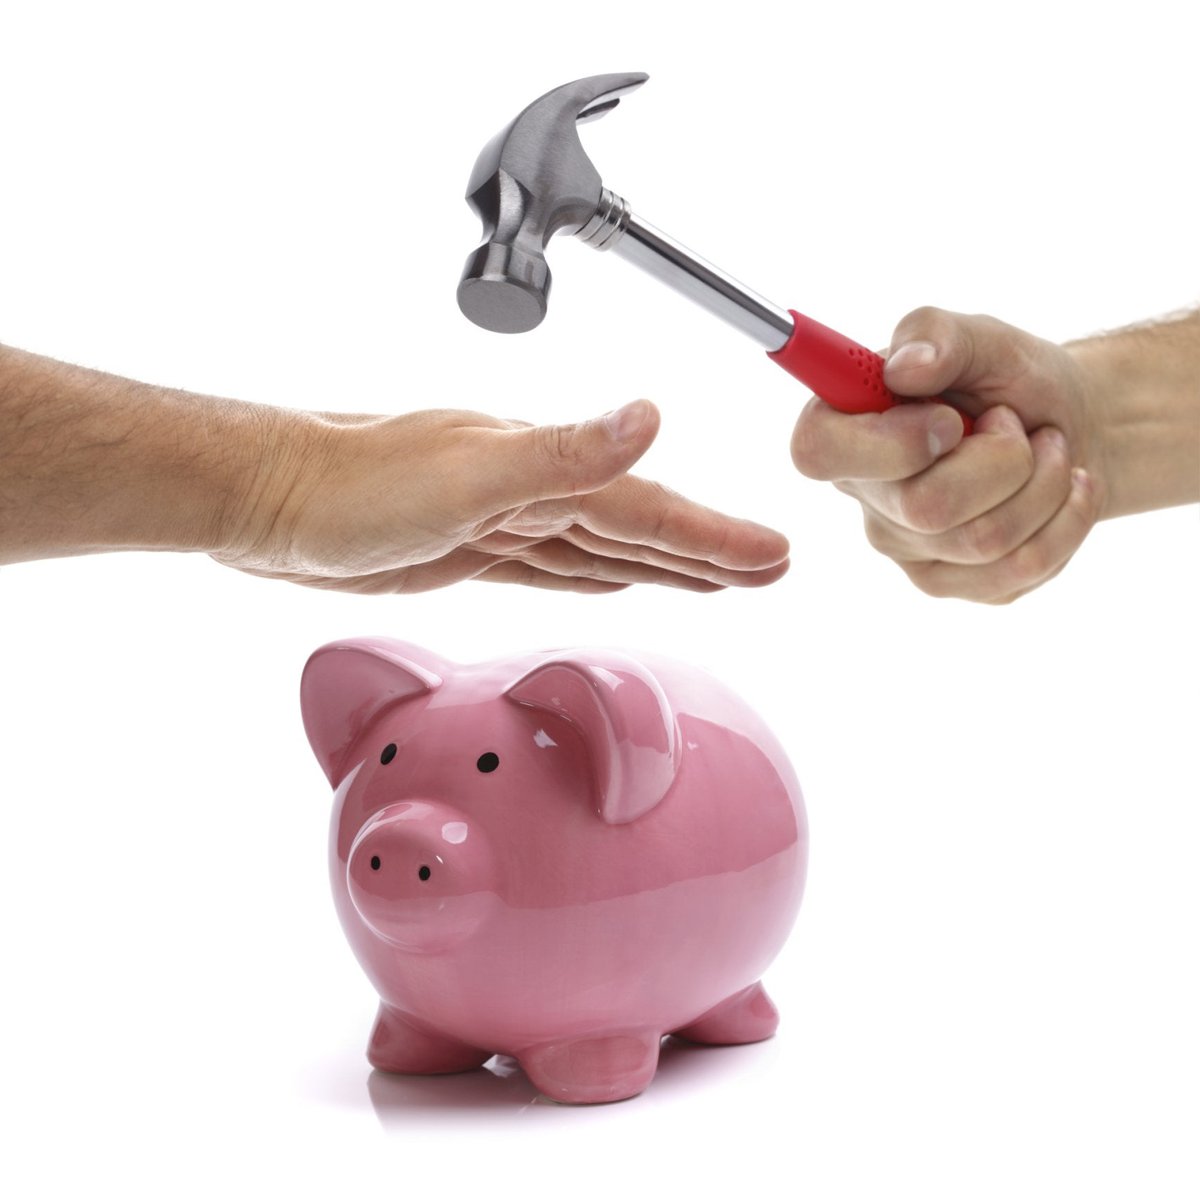 A hand preventing a hammer from breaking a piggy bank.